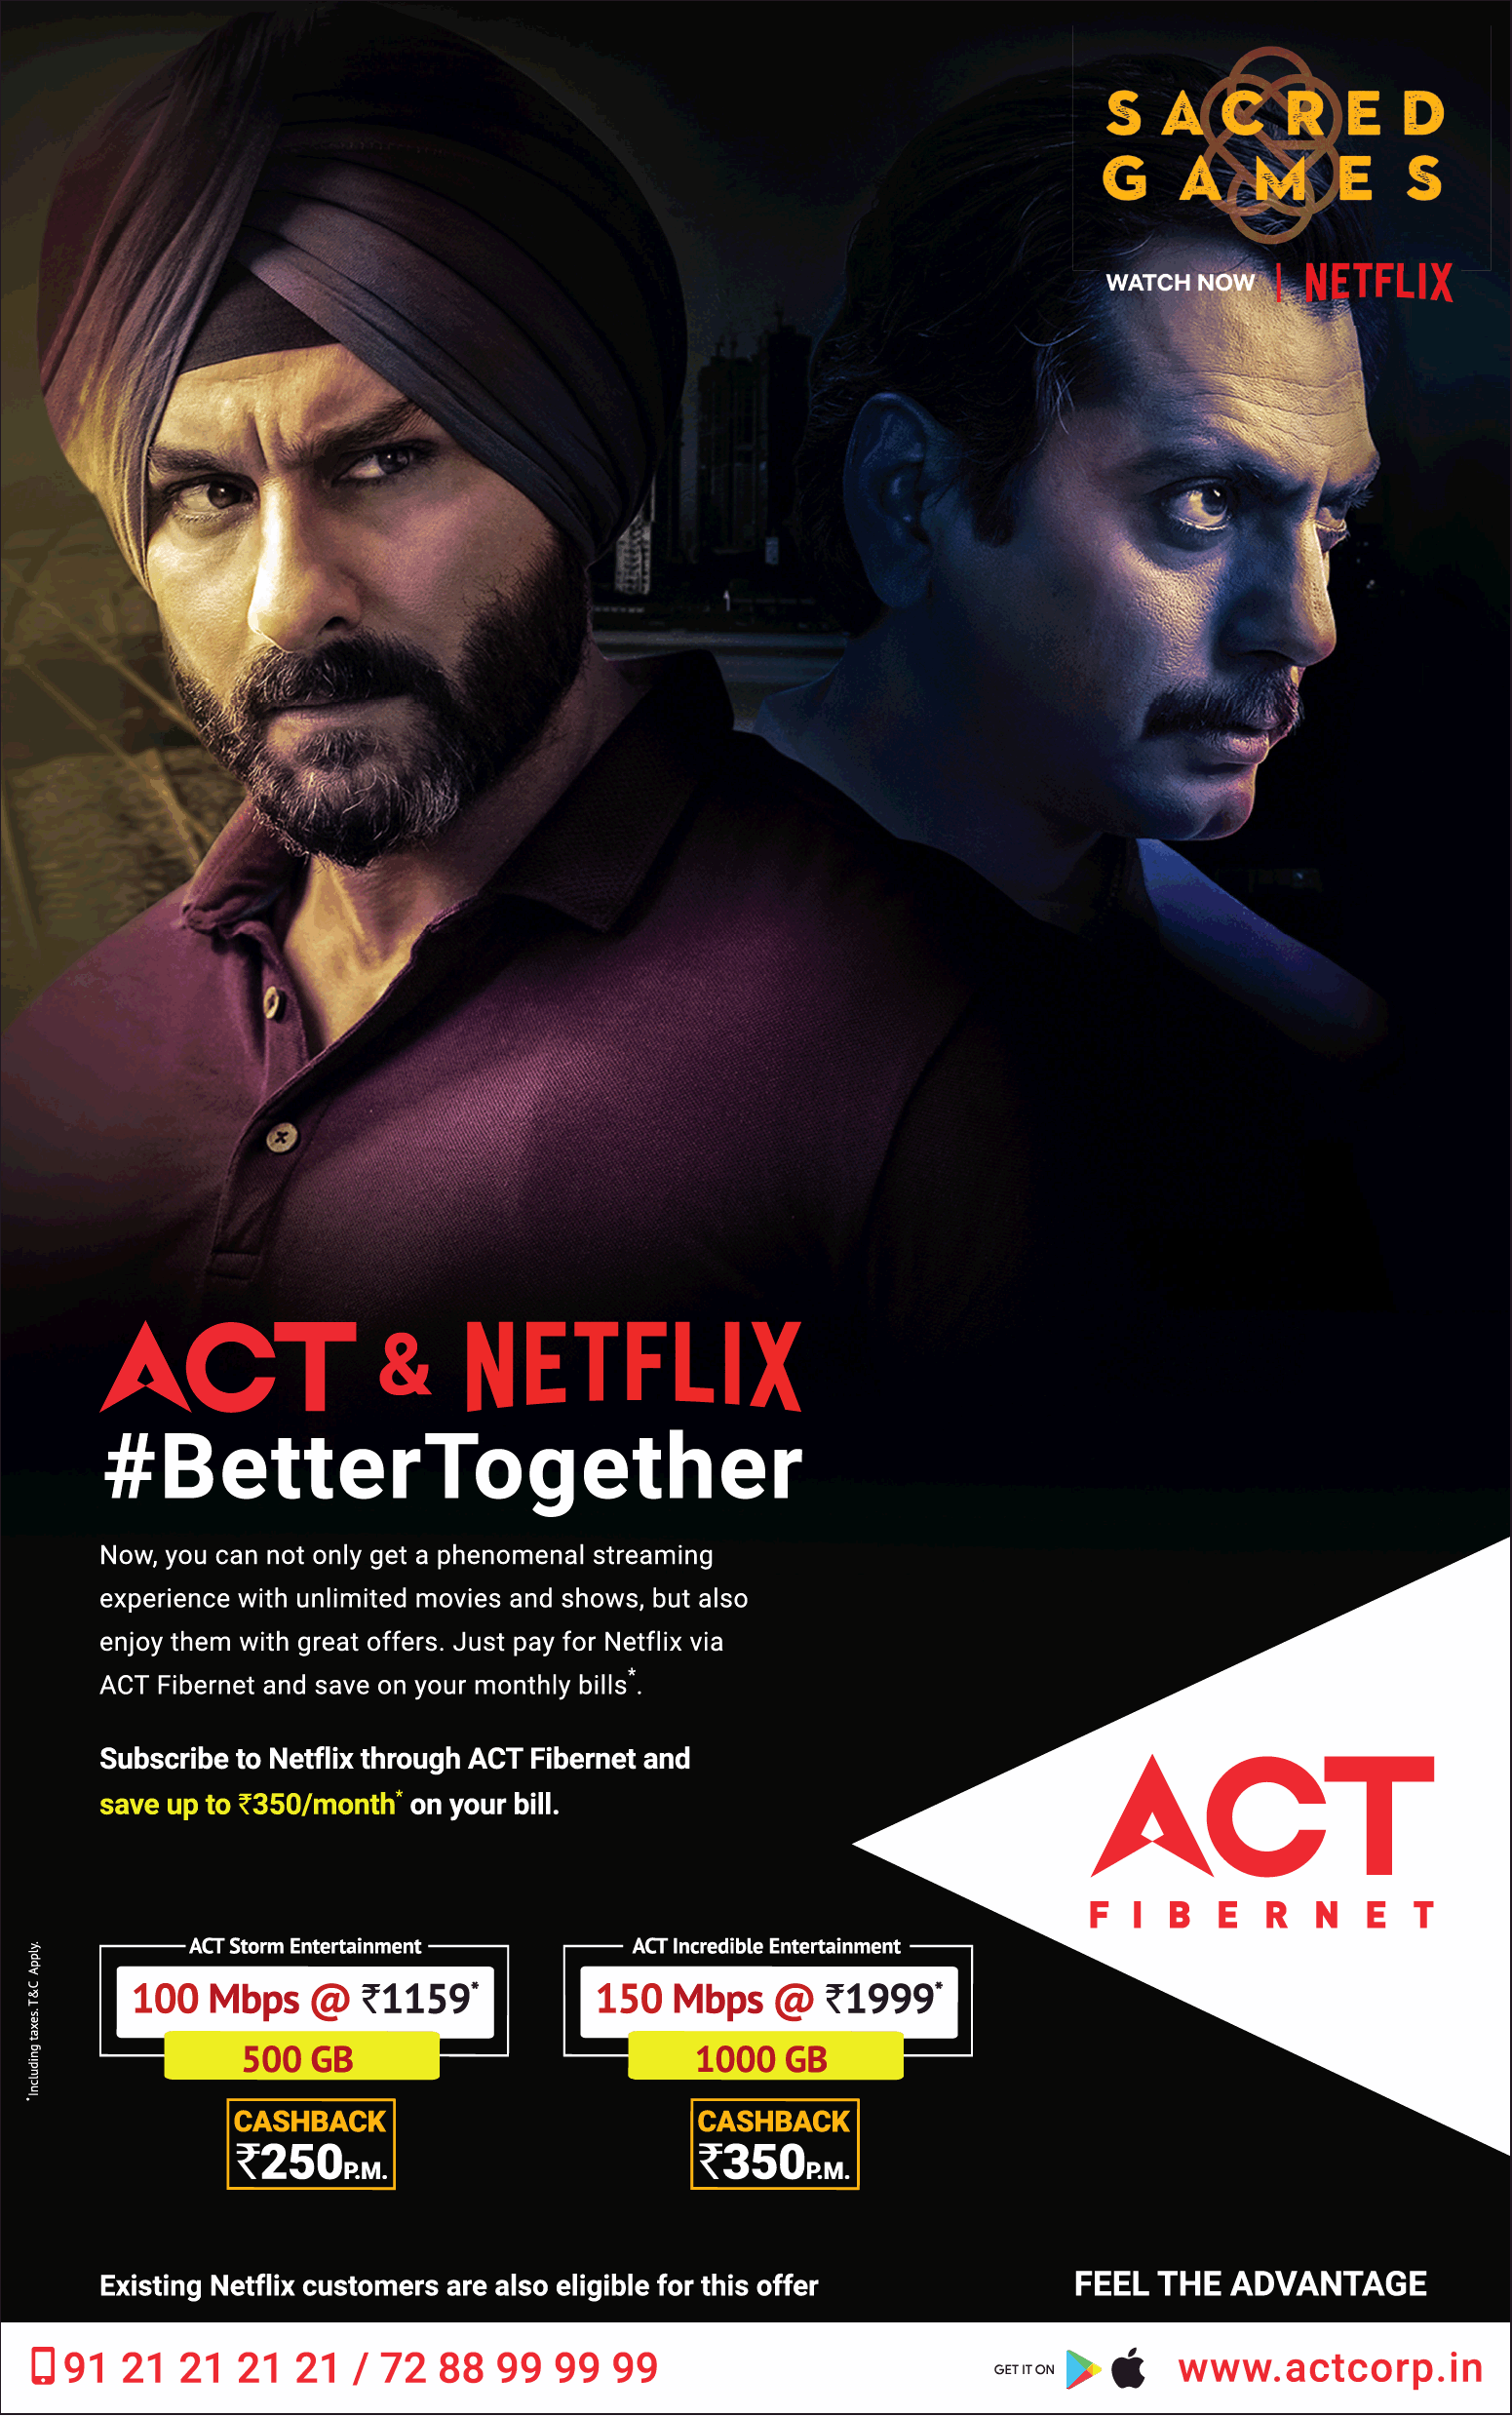 act-fibernet-sacred-games-watch-now-netflix-ad-times-of-india-bangalore-22-03-2019.png